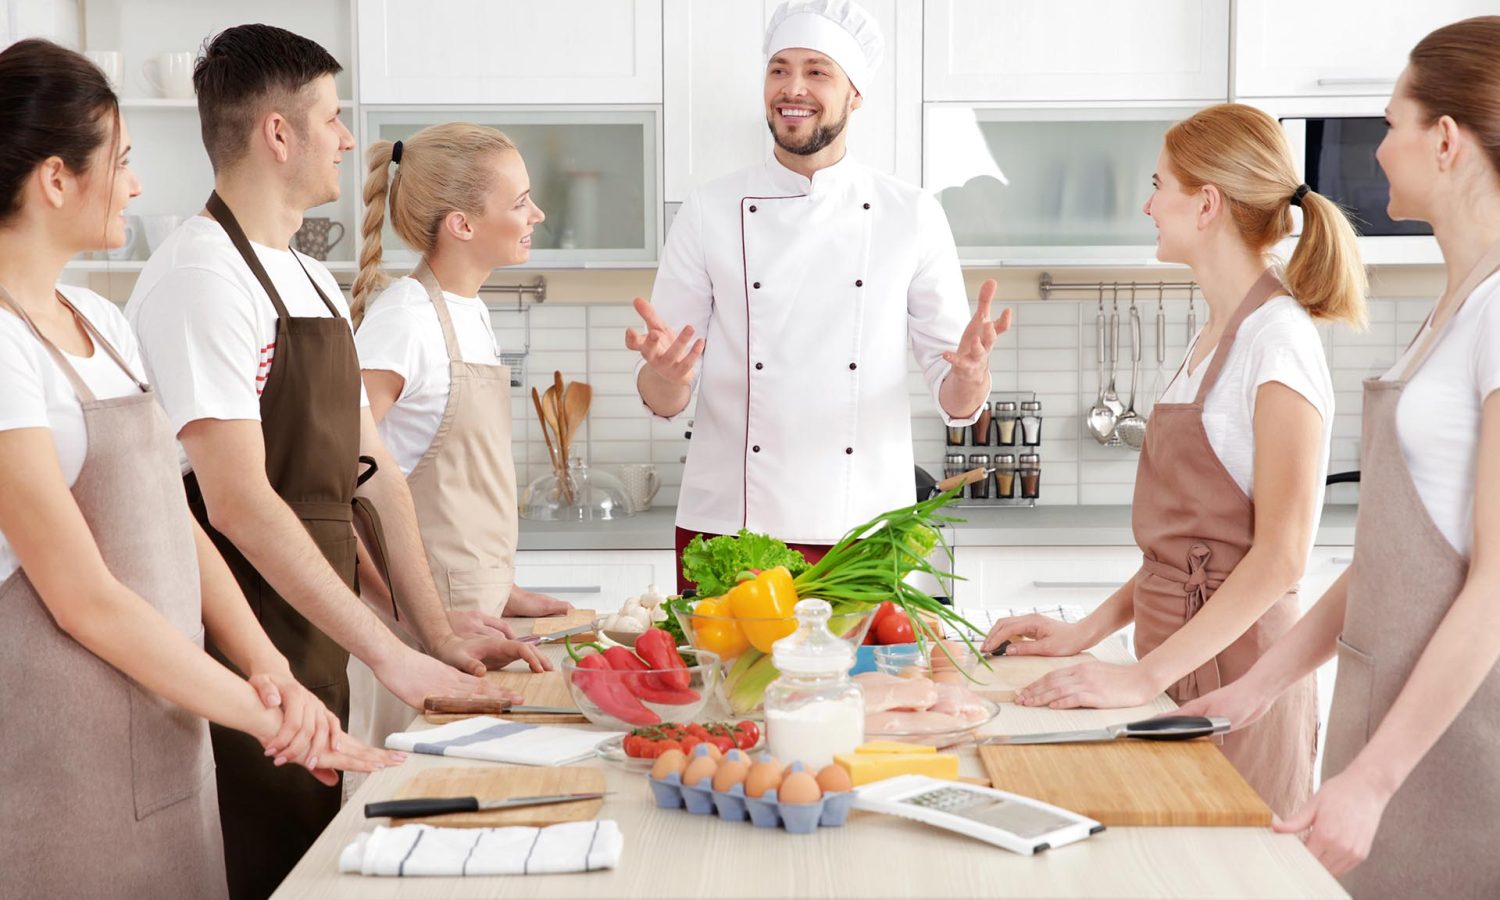 Professional Cooking Courses for Groups in Italy